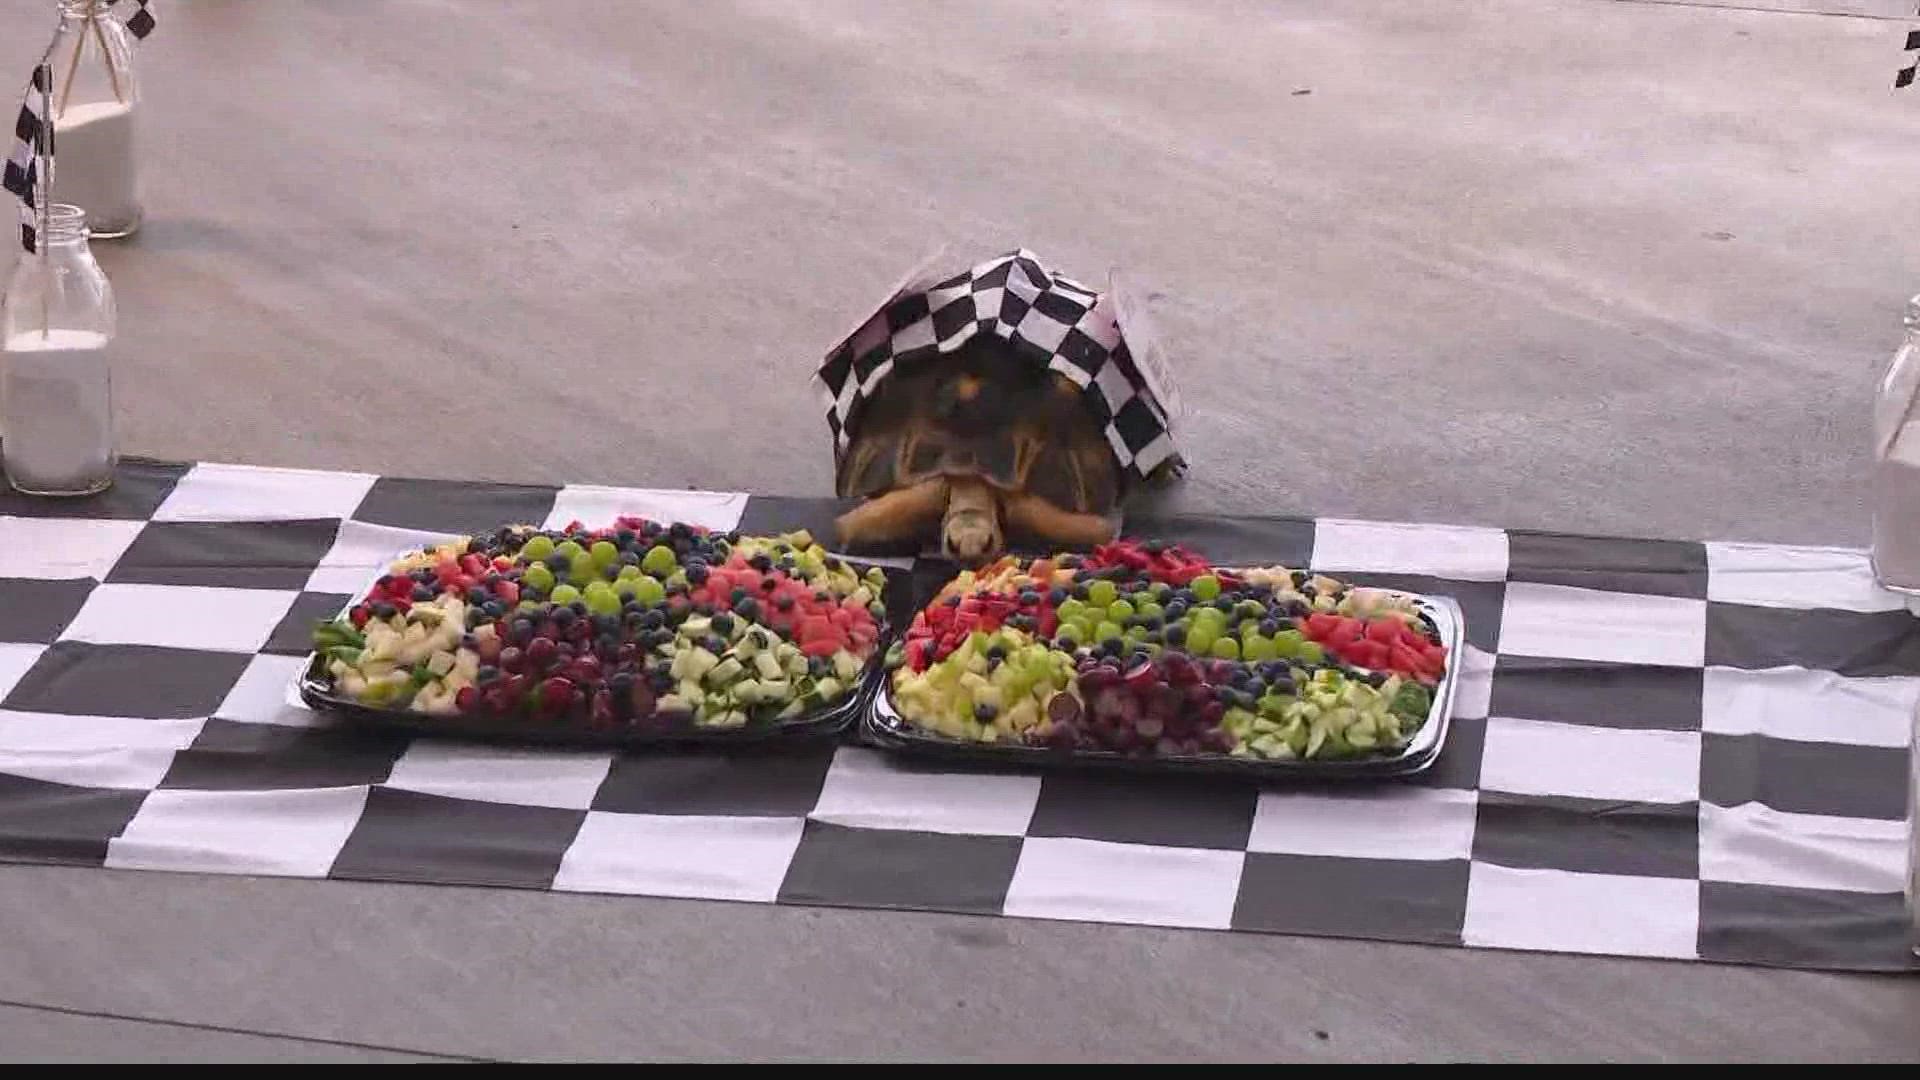 Simon the tortoise made it to the finish line first, meaning he got first dibs on the fruit tray!